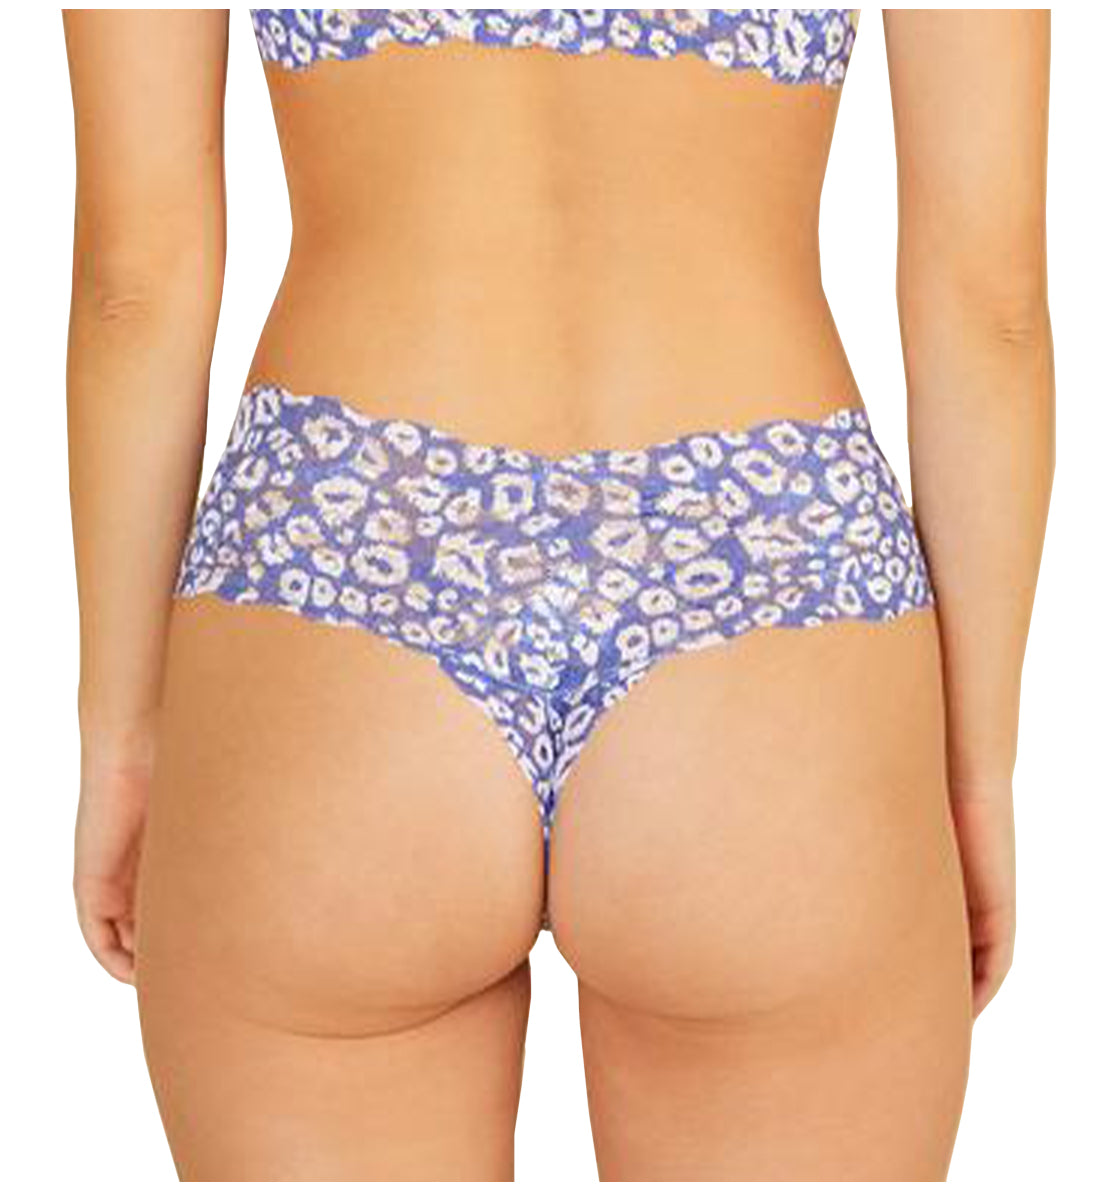 Cosabella Never Say Never Printed Comfie Thong (NEVEP0343),S/M,Leopard Cielo - Leopard Cielo,S/M